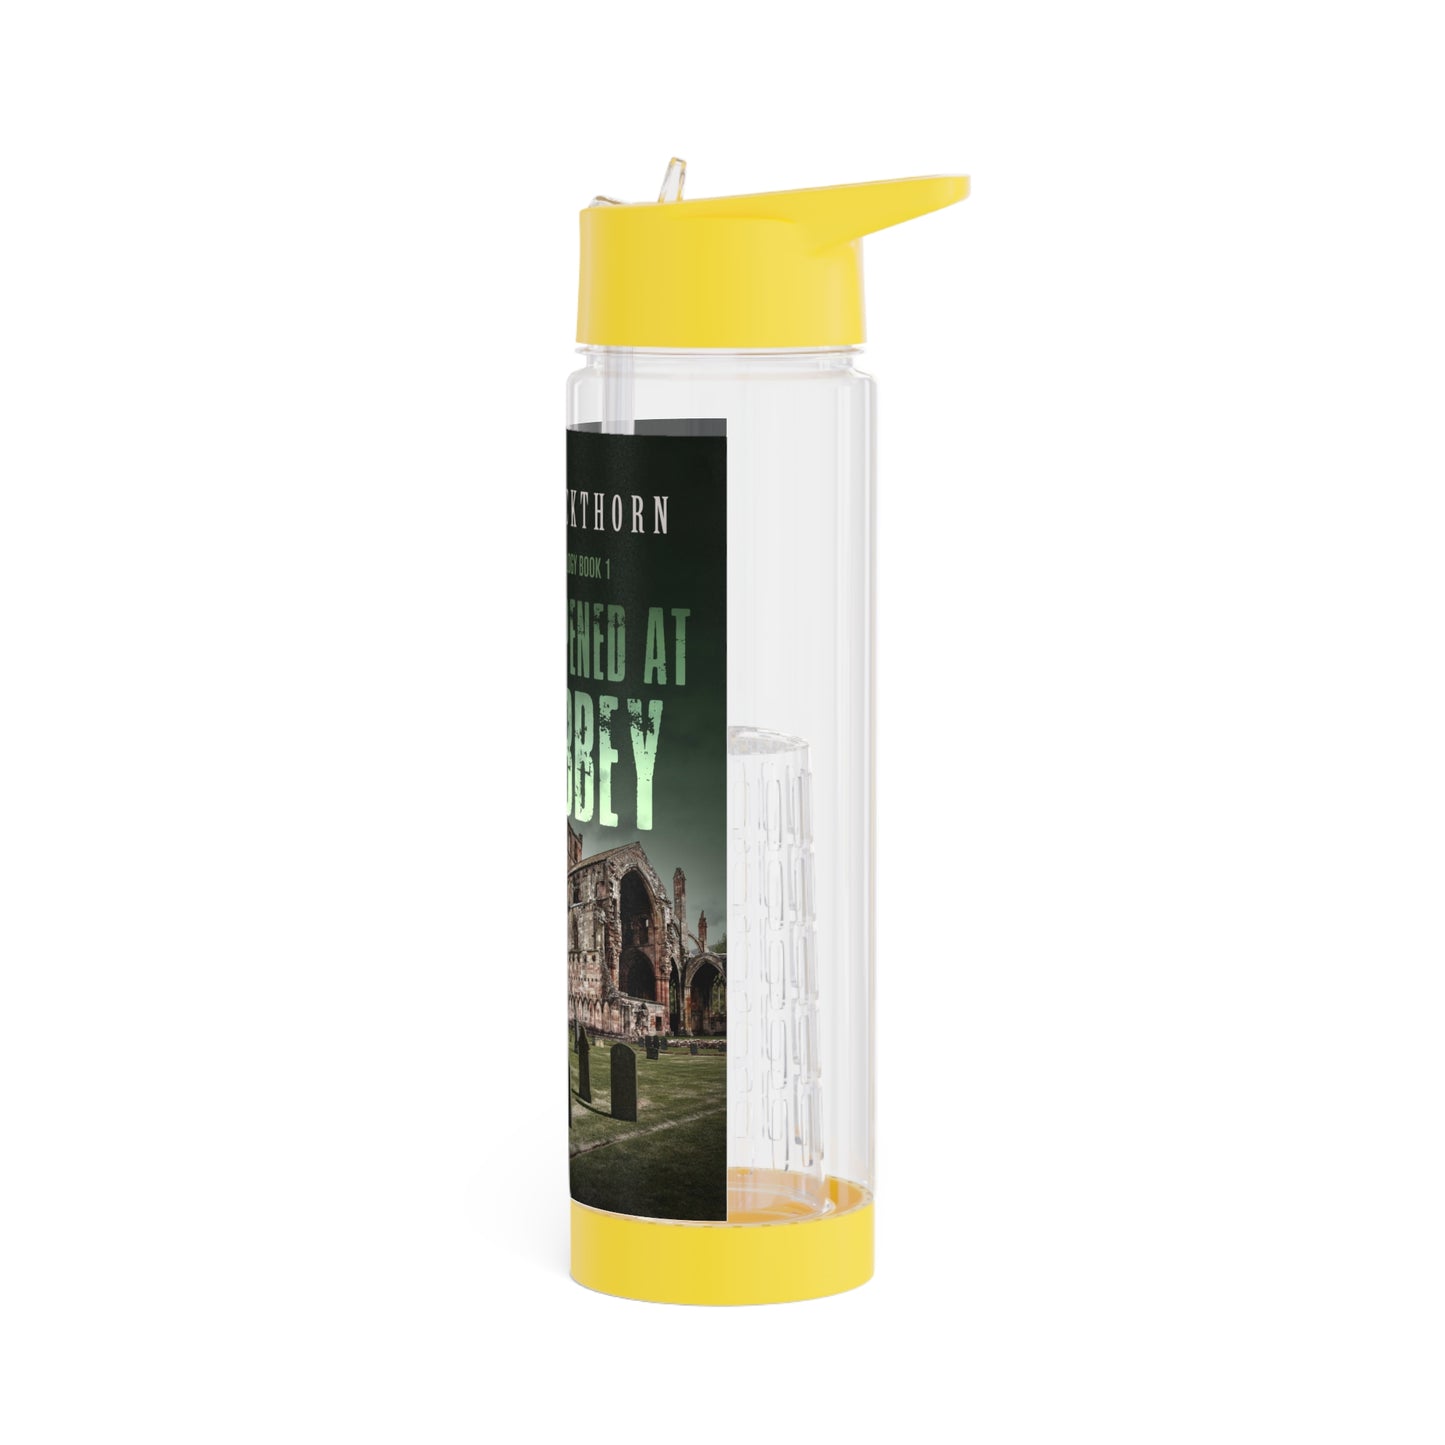 What Happened at the Abbey - Infuser Water Bottle